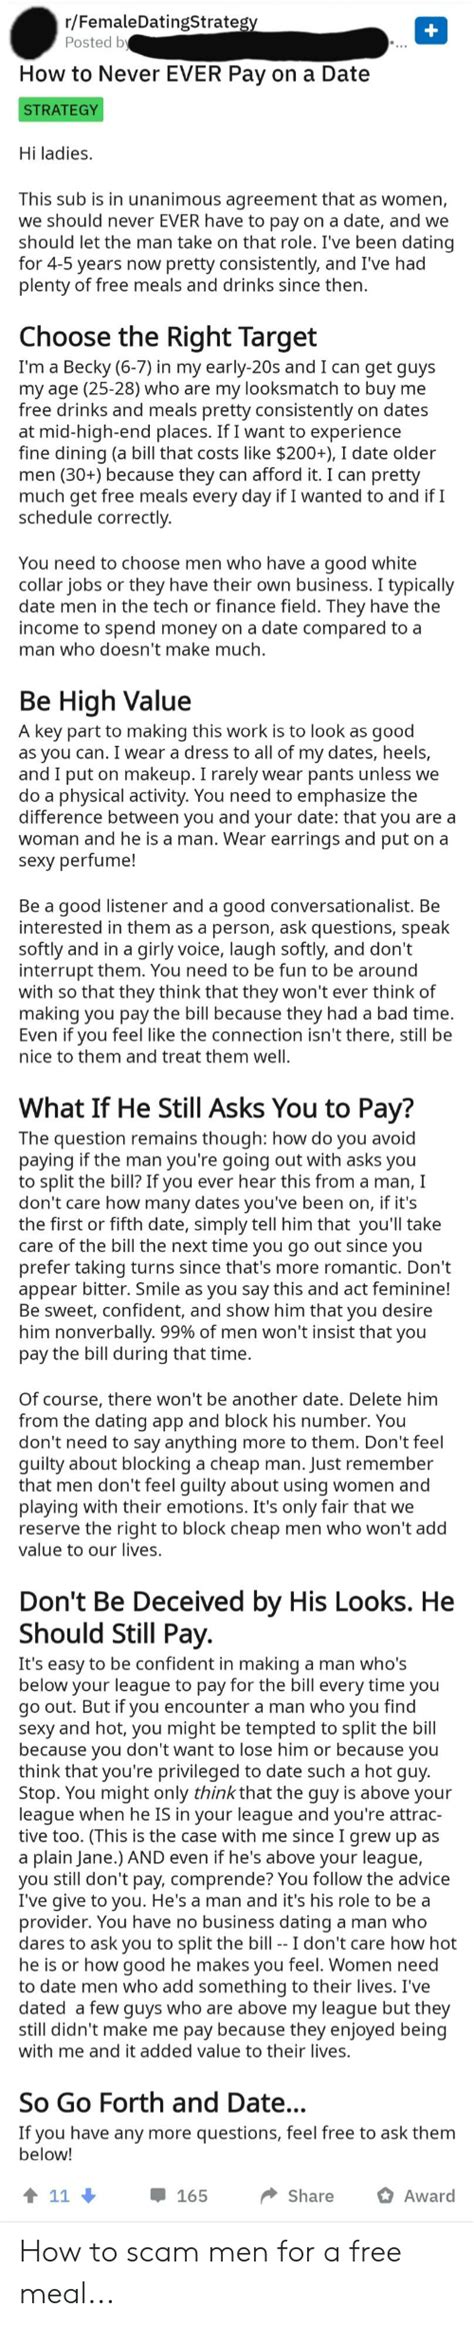 Rfemaledatingstrategy Posted By How To Never Ever Pay On A Date